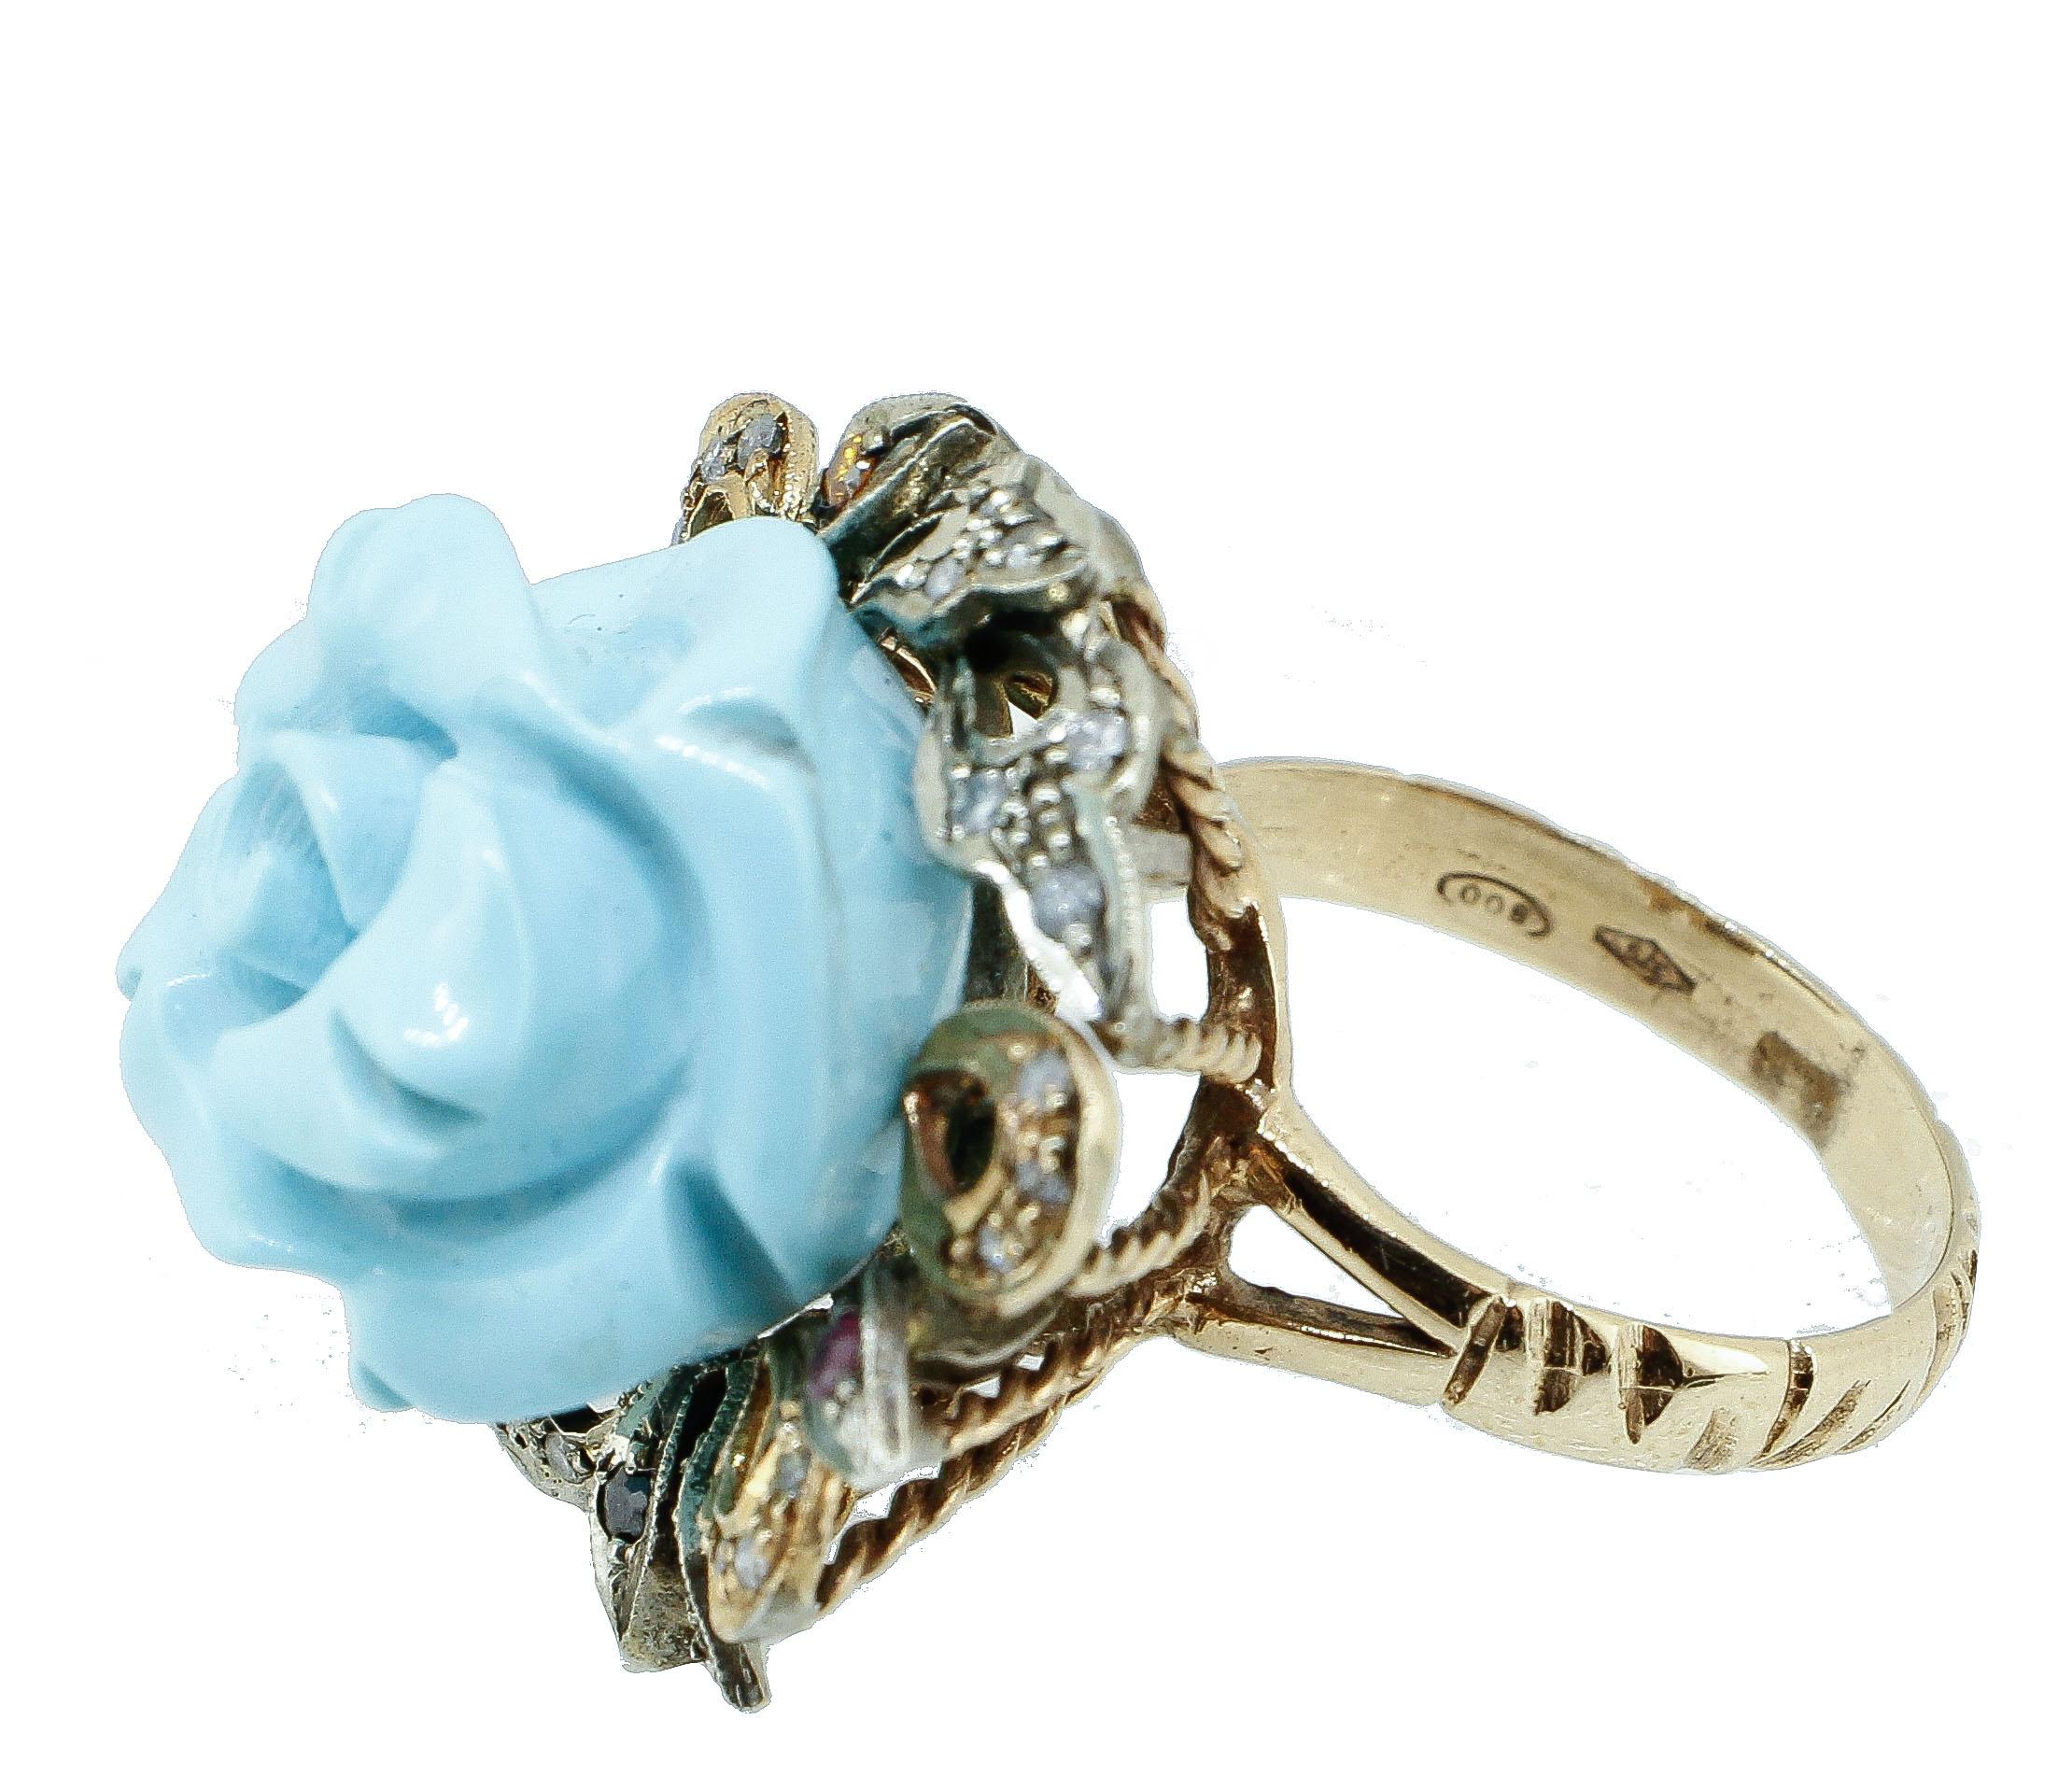 shipping policy: 
No additional costs will be added to this order.
Shipping costs will be totally covered by the seller (customs duties included). 


Rose shaped turquoise paste ring in 9kt yellow gold and silver embellished with diamonds and